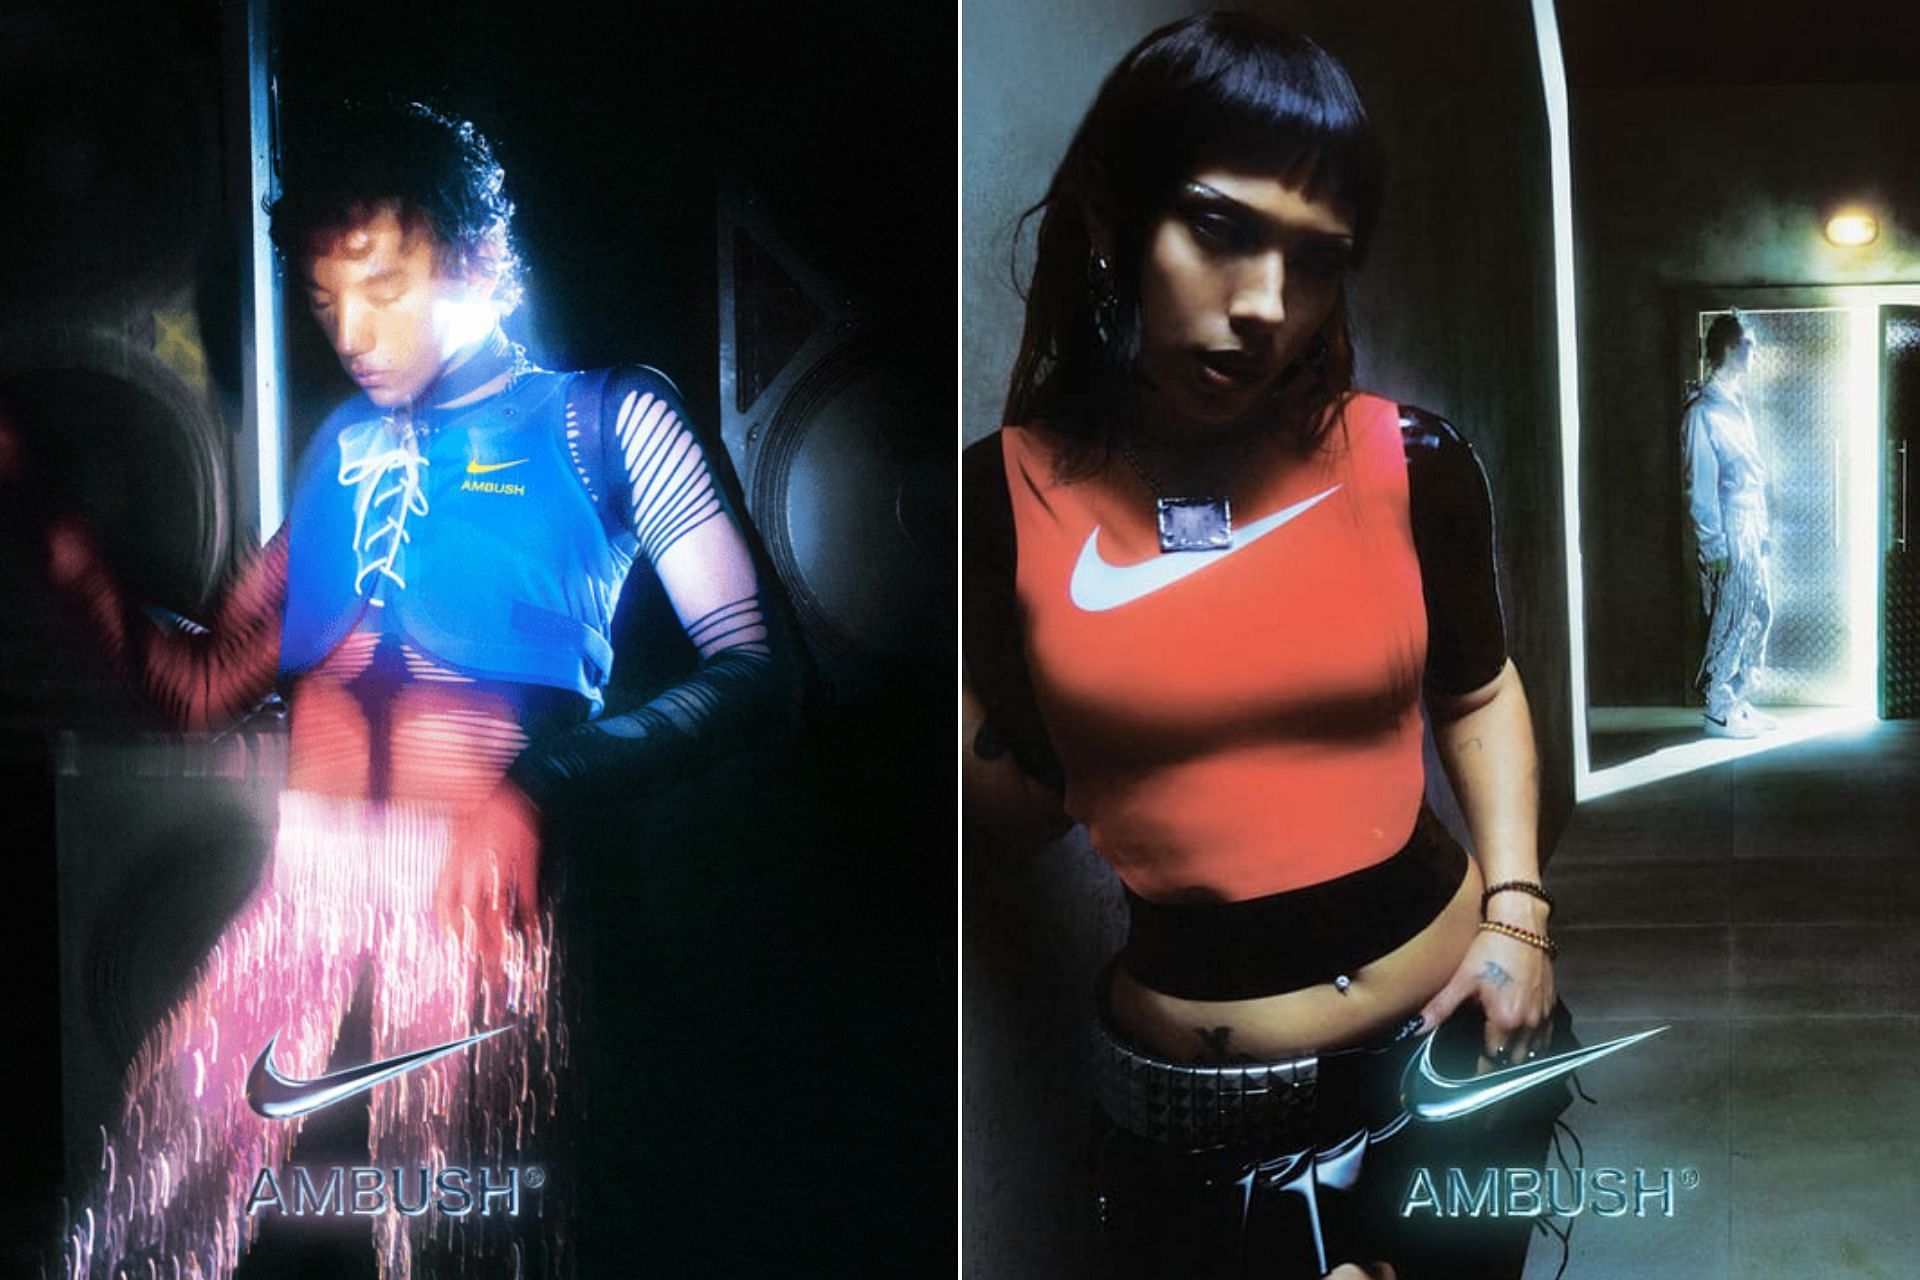 Nike x AMBUSH Apparel Collection Release Date. Nike SNKRS IN